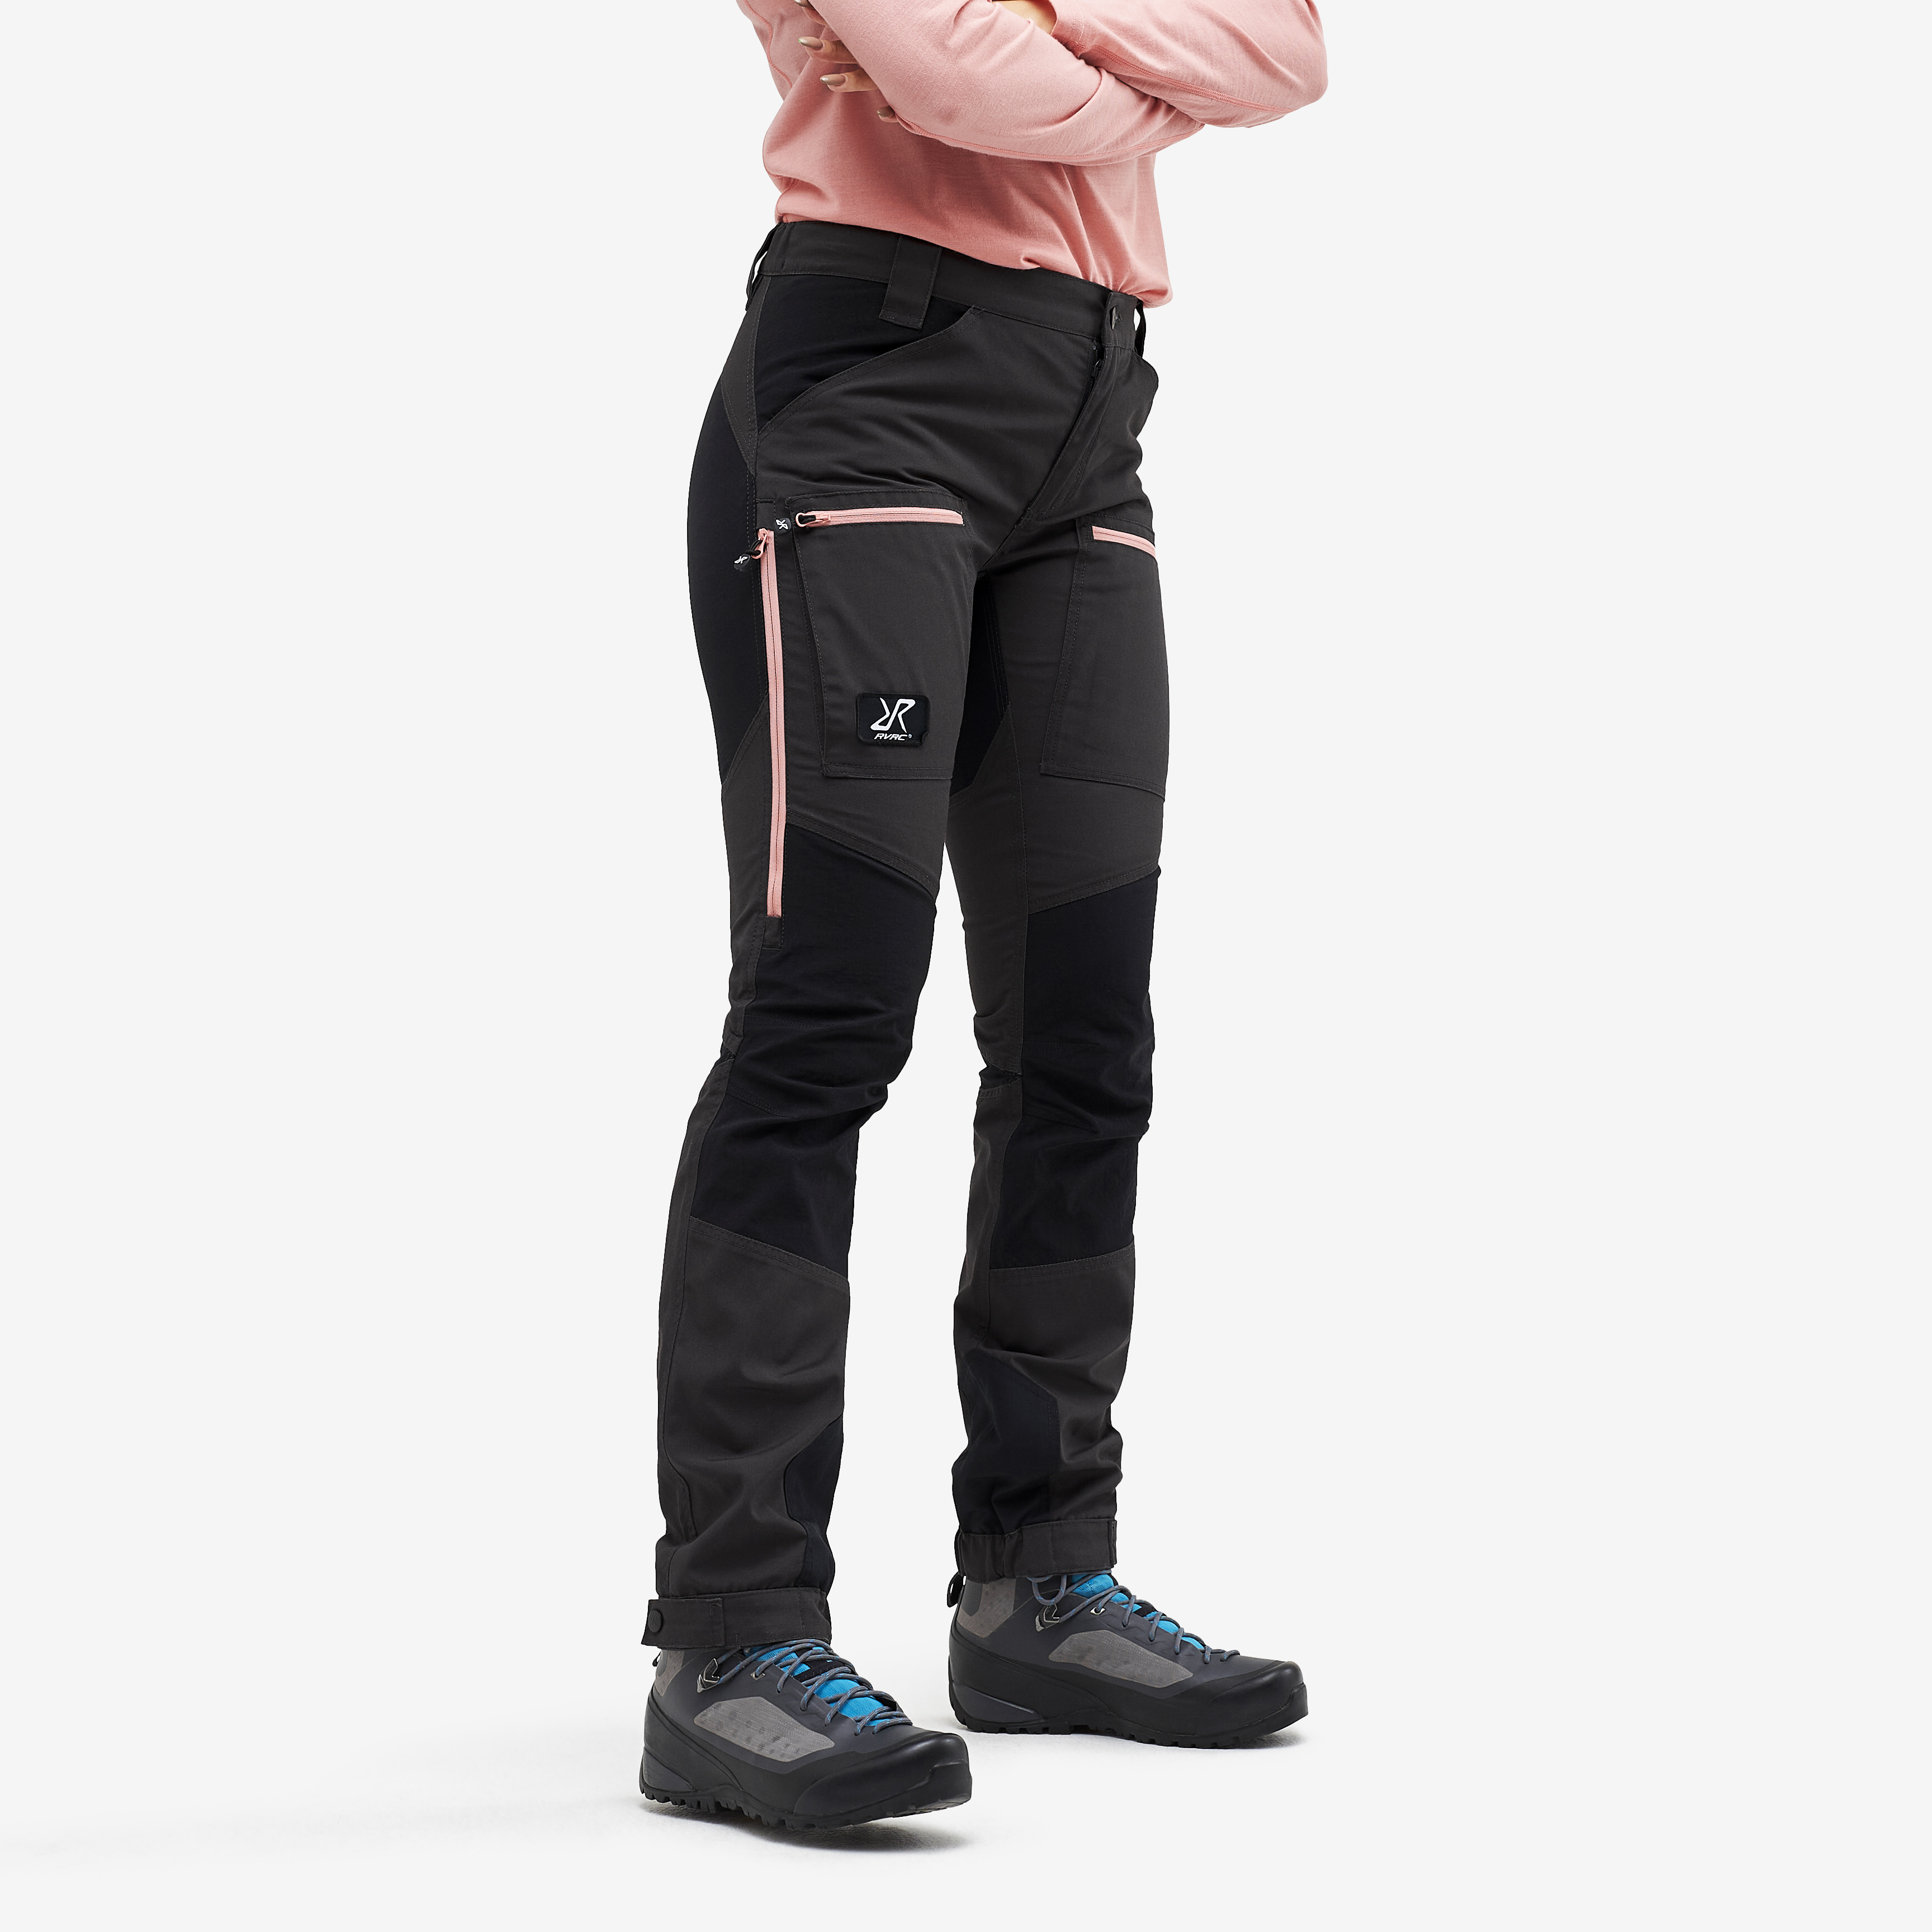 Nordwand Pro Pants Anthracite/Dusty pink